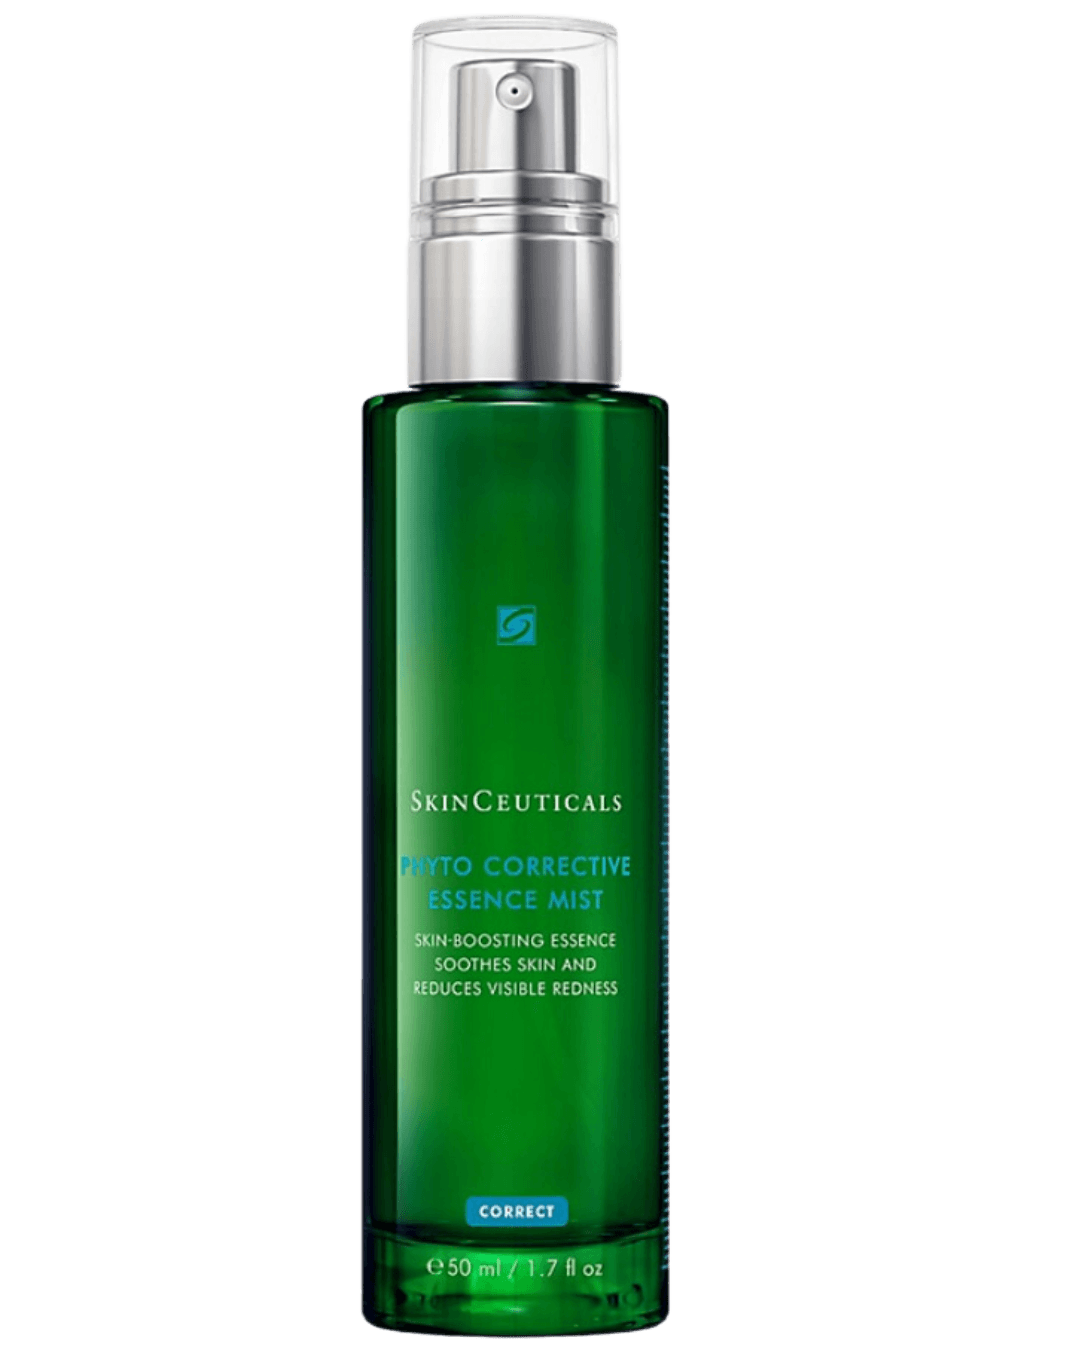 Daily Vanity Beauty Awards 2024 Best Skincare SkinCeuticals Phyto Corrective Essence Mist Voted By Beauty Experts